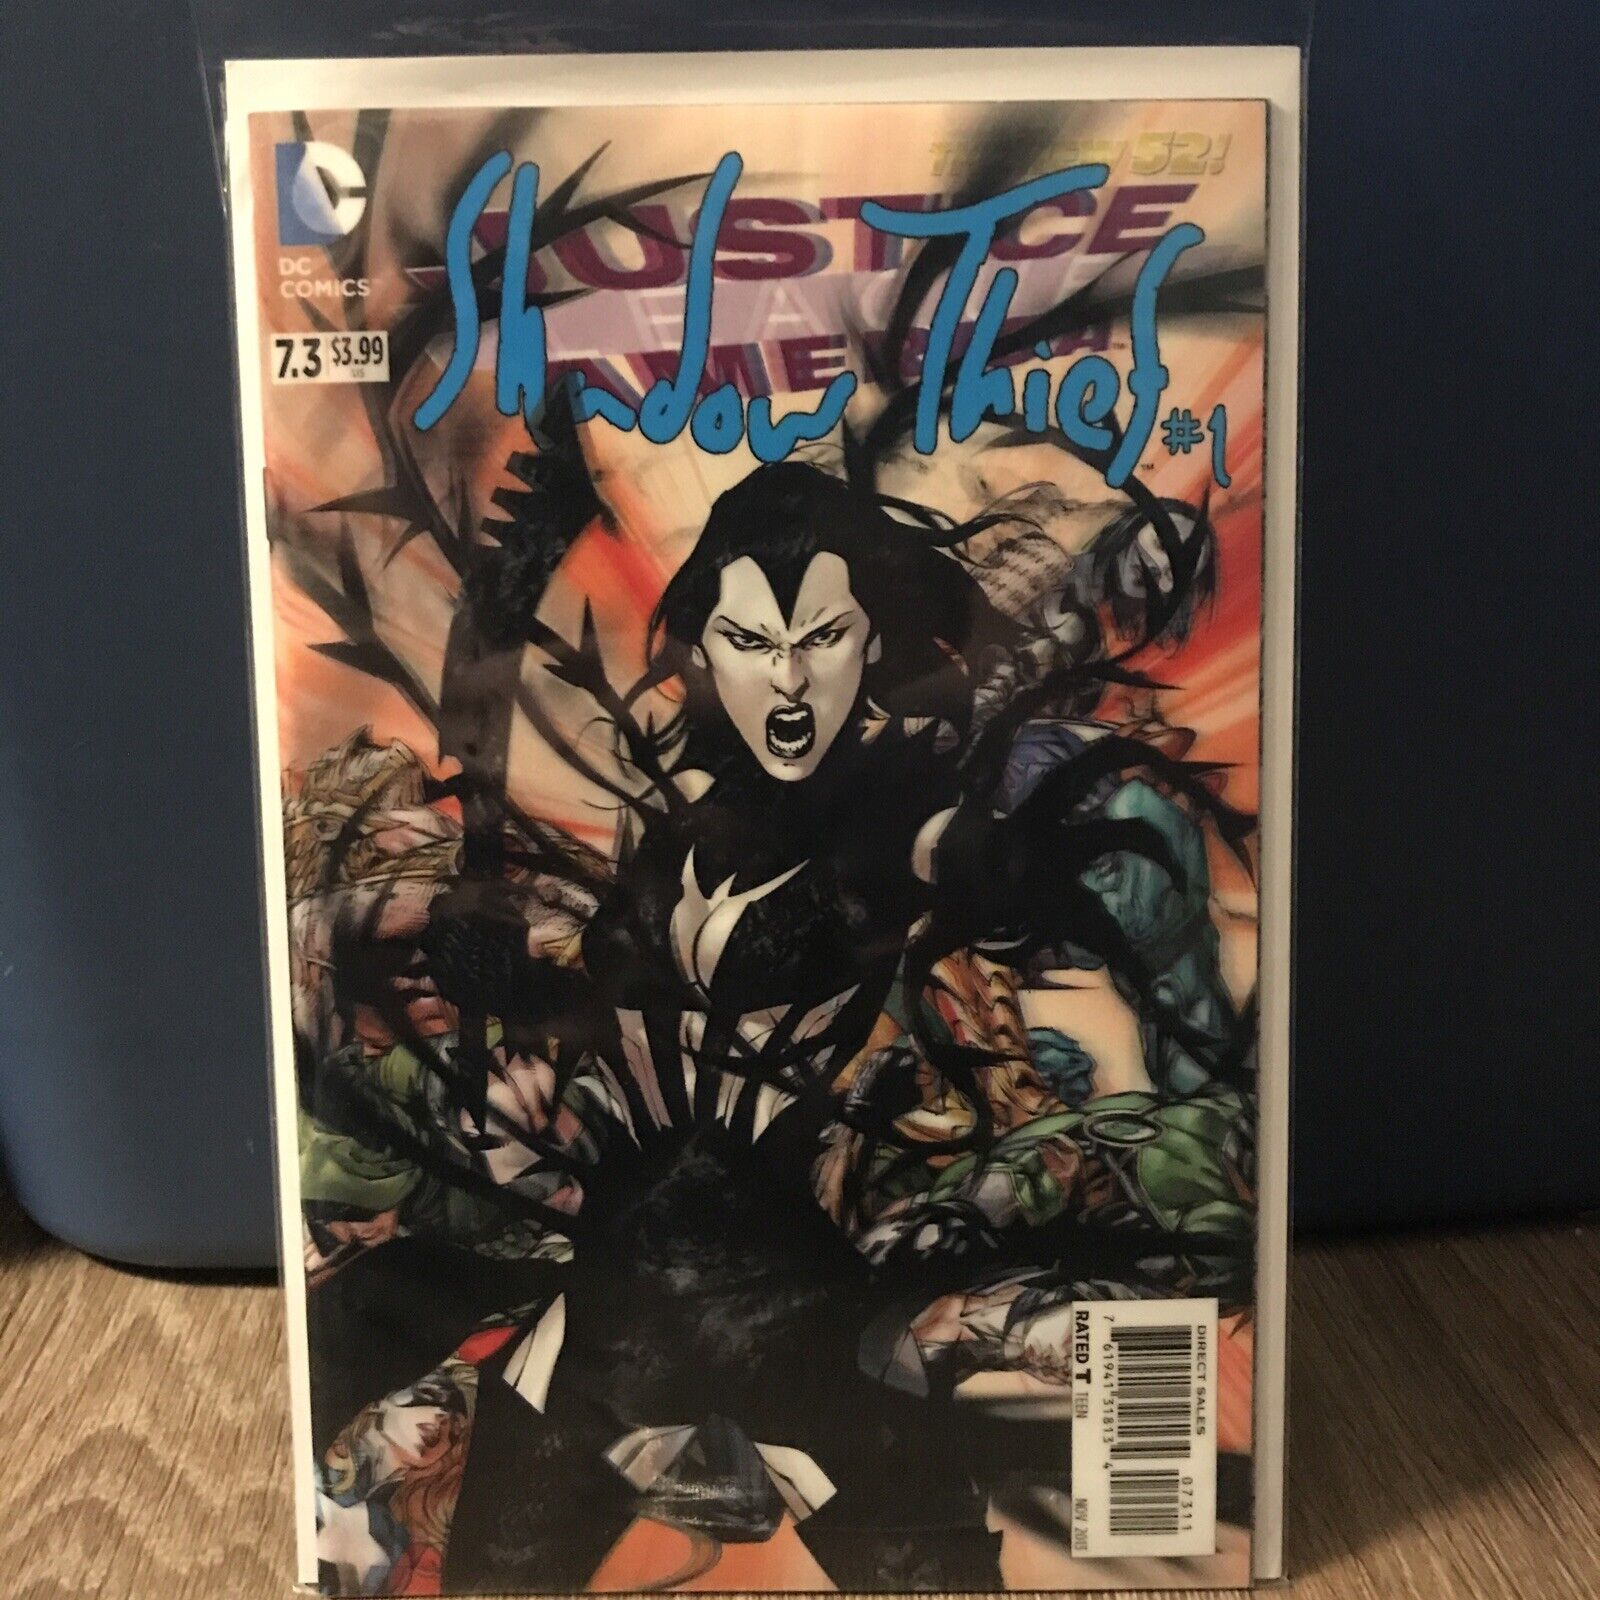 JUSTICE LEAGUE AMERICA #7.3. SHADOW THIEF #1 3D LENTICULAR COVER 2013 NEW 52